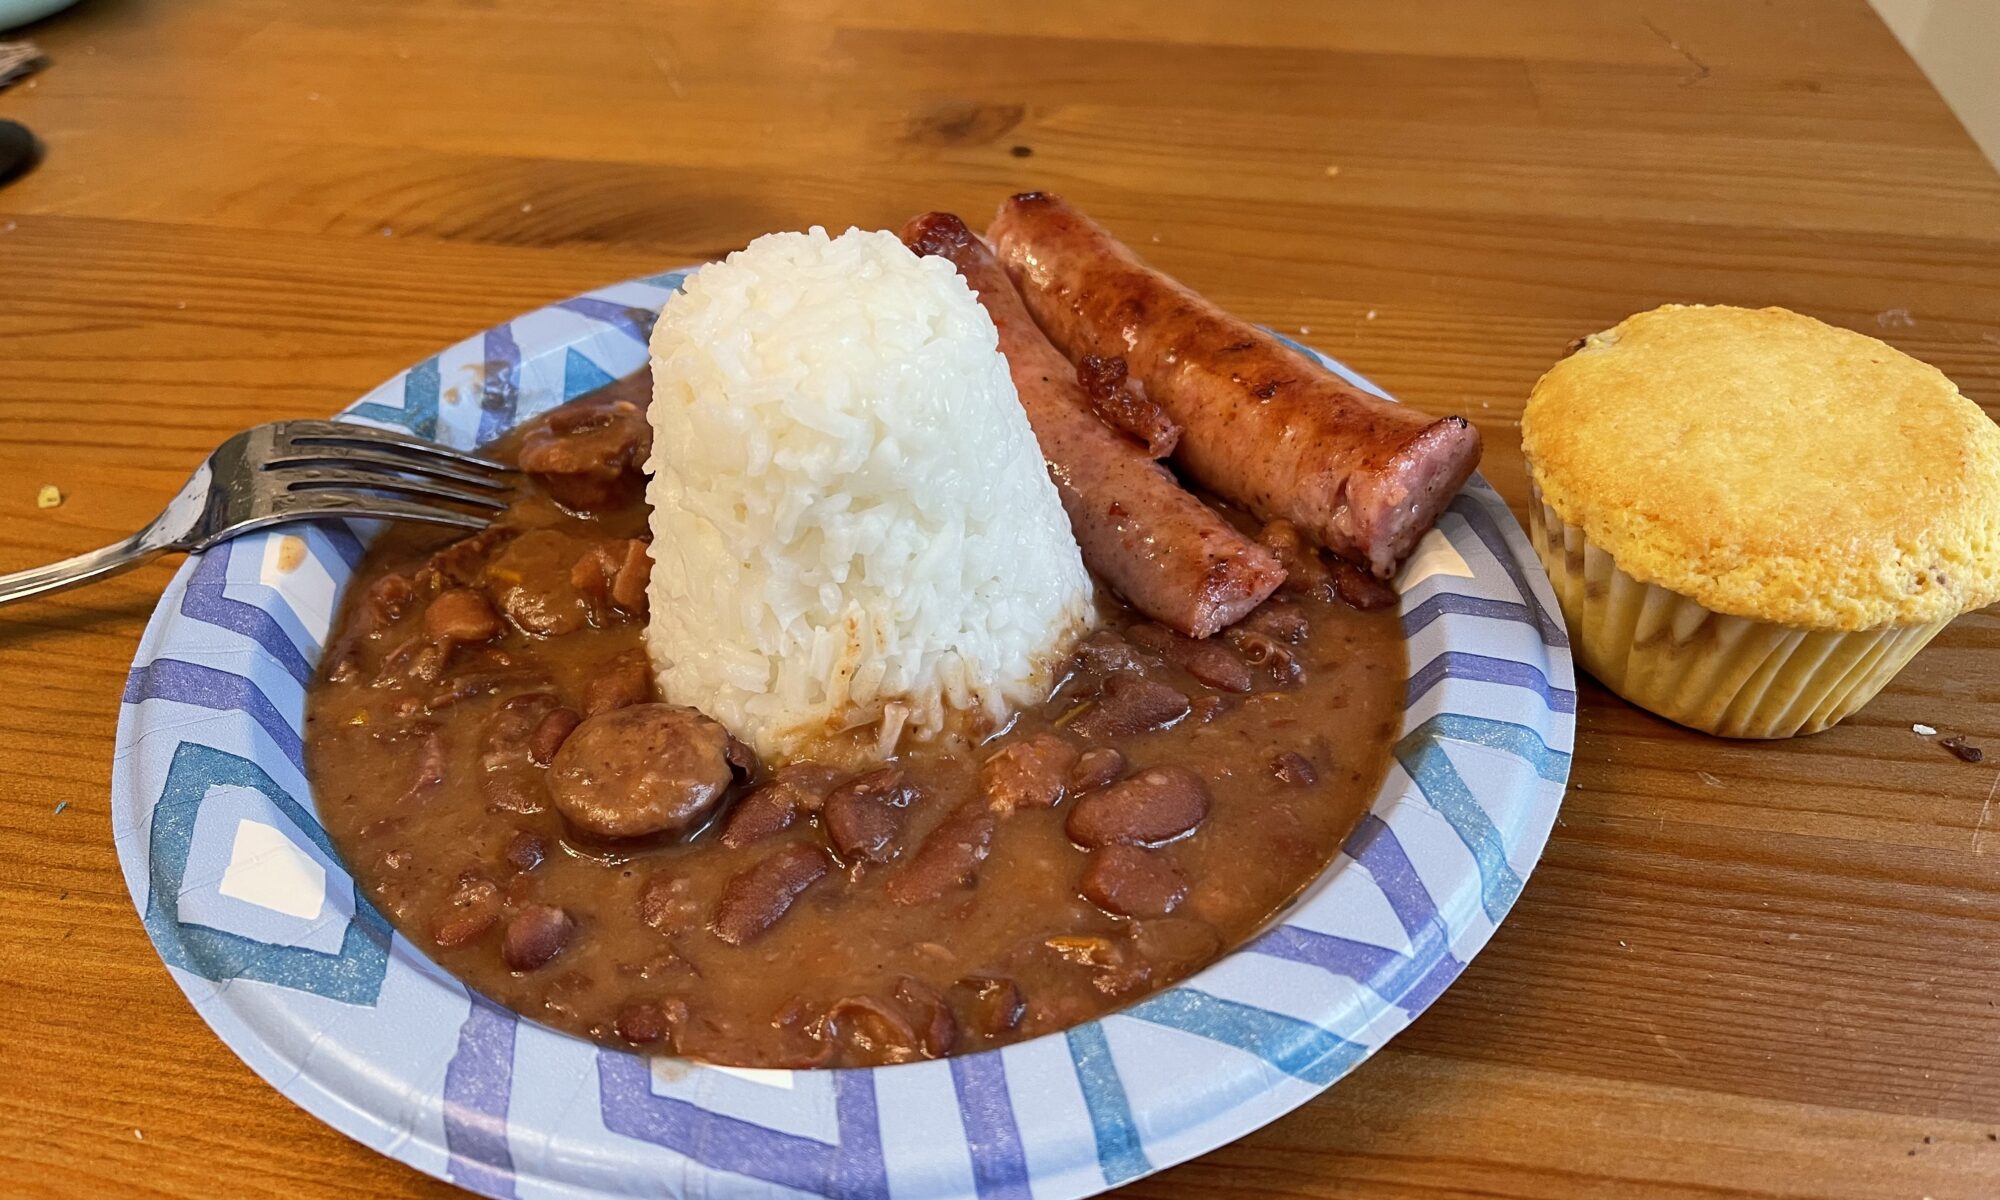 Red beans and rice, cornbread and smoked sausage on a paper plate